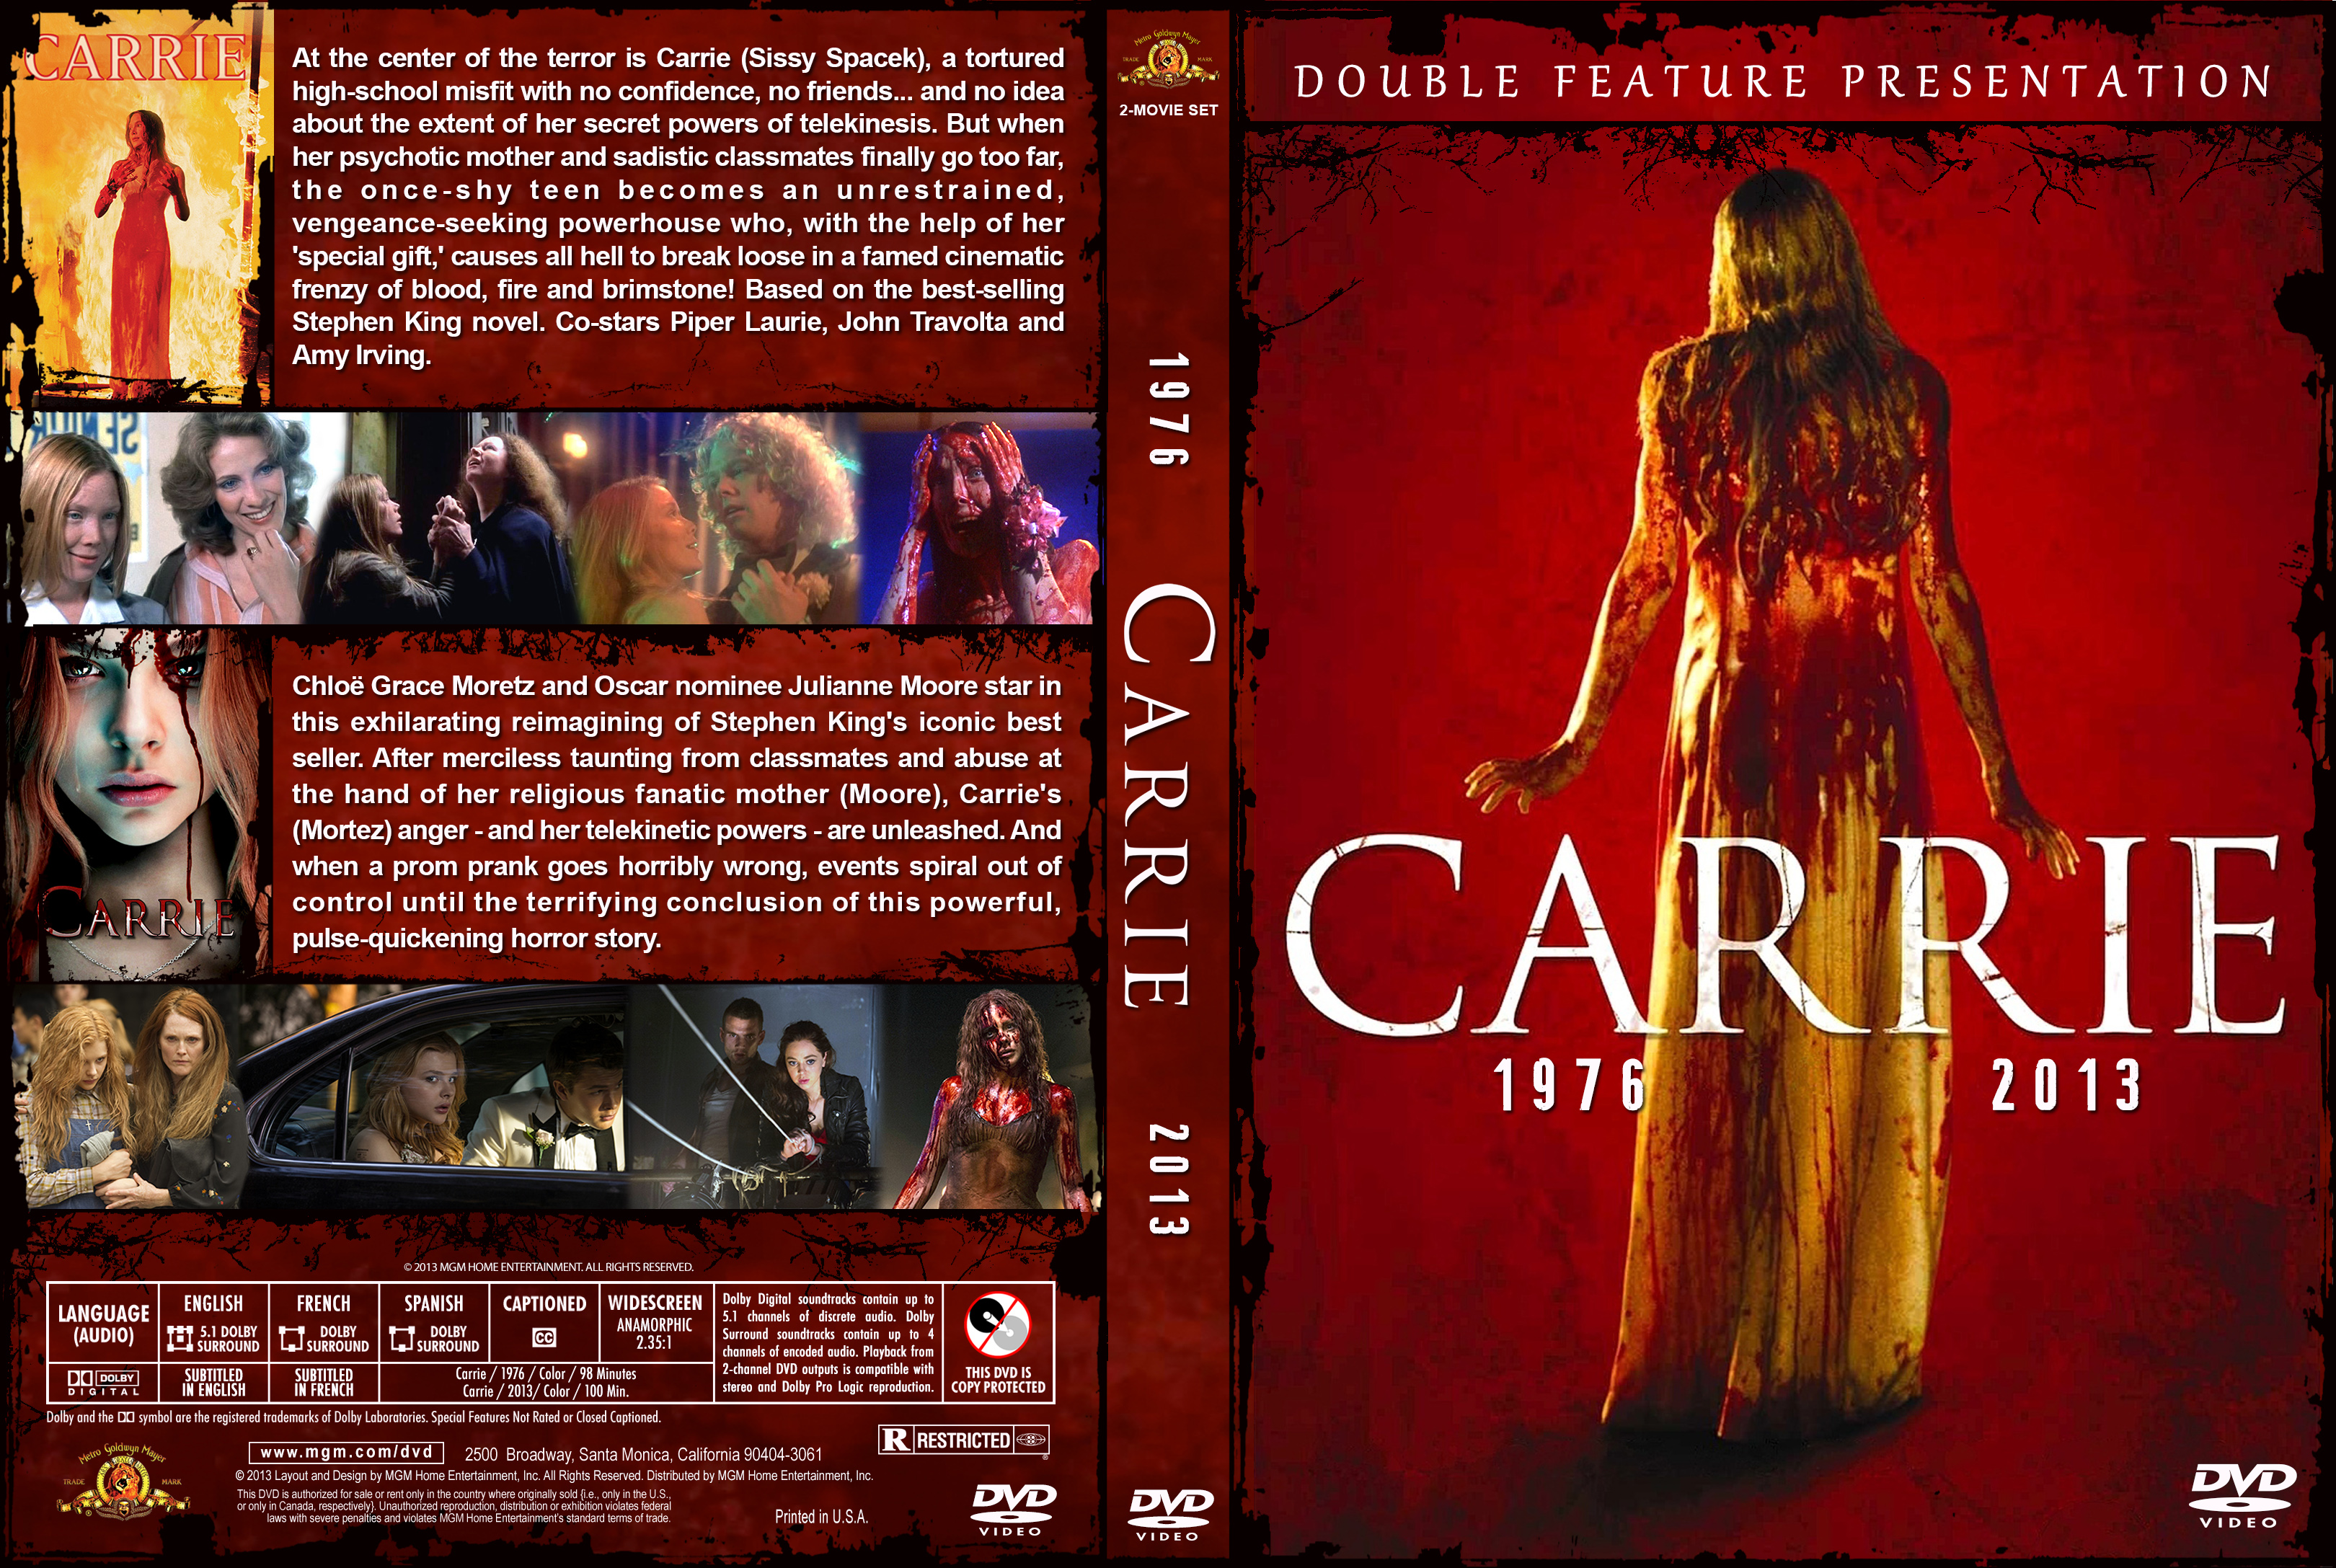 DVD Covers, Cover Century